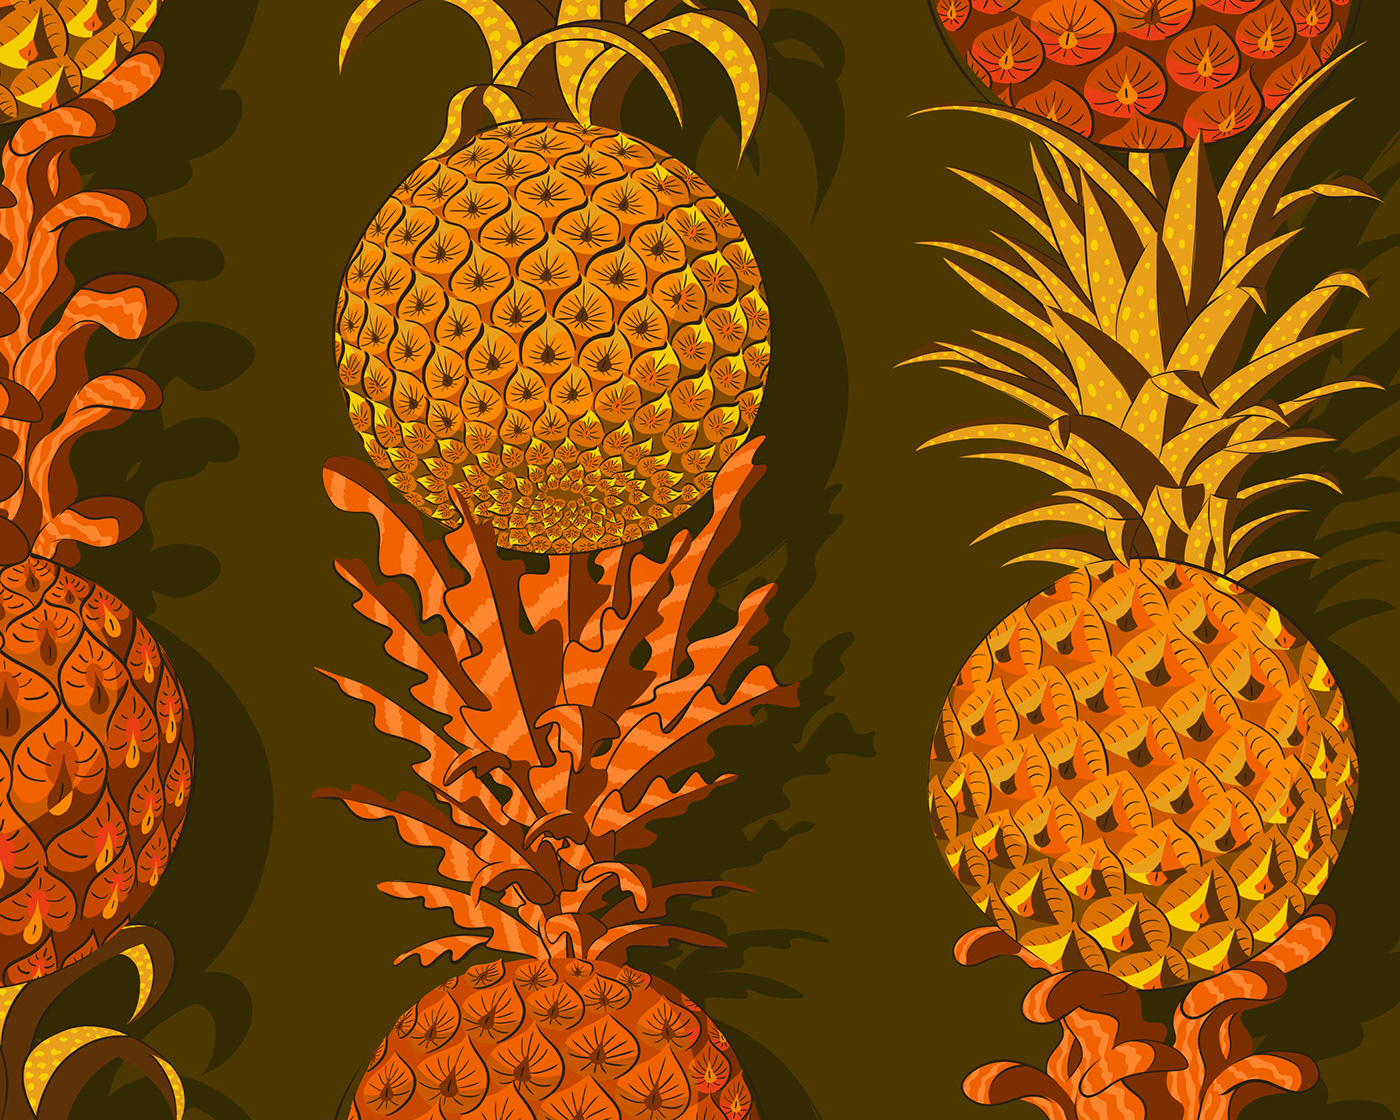 Digital illustration showing illustrations of orange pineapples stacked on top of one another.